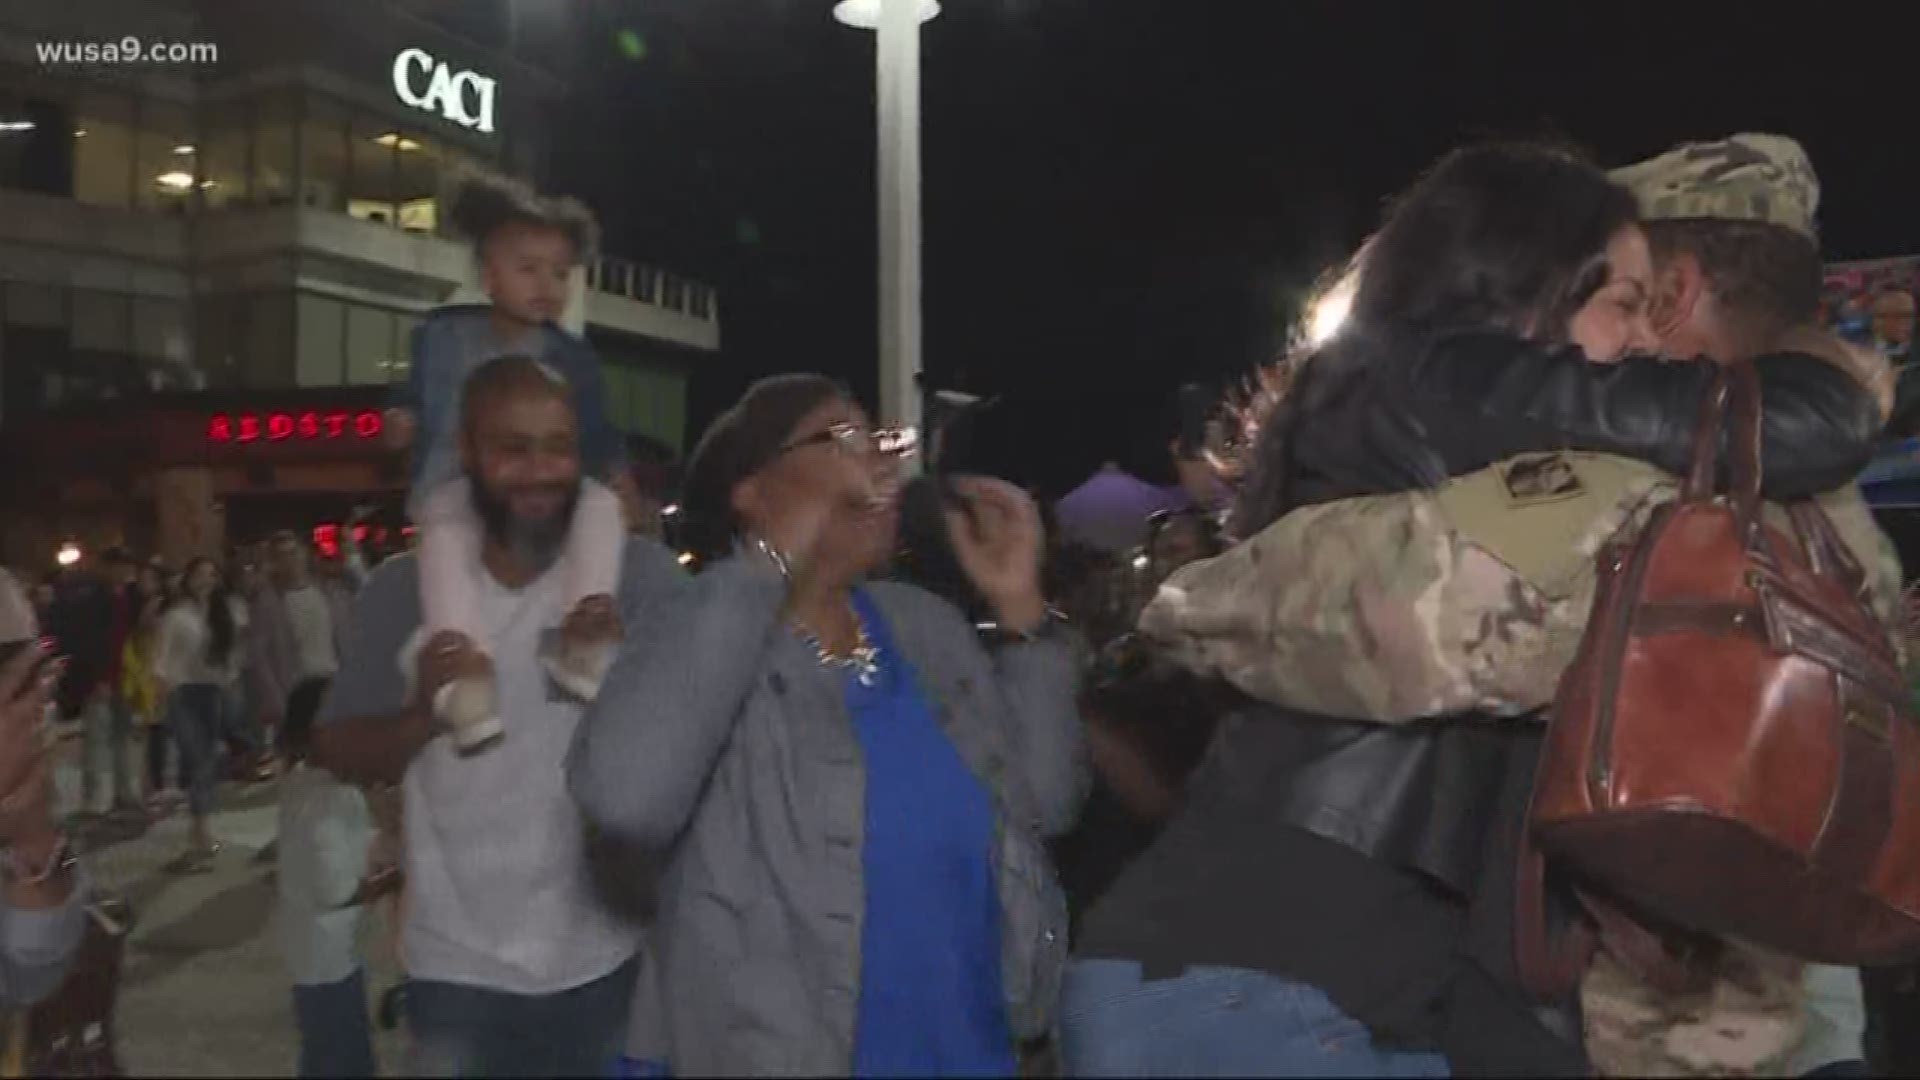 It was a night to remember for the family of Army Captain Justin Brown. He's been serving our country in Iraq for the last year. Saturday he returned to National Harbor to reunite his wife and their children in a surprise they will never forget.